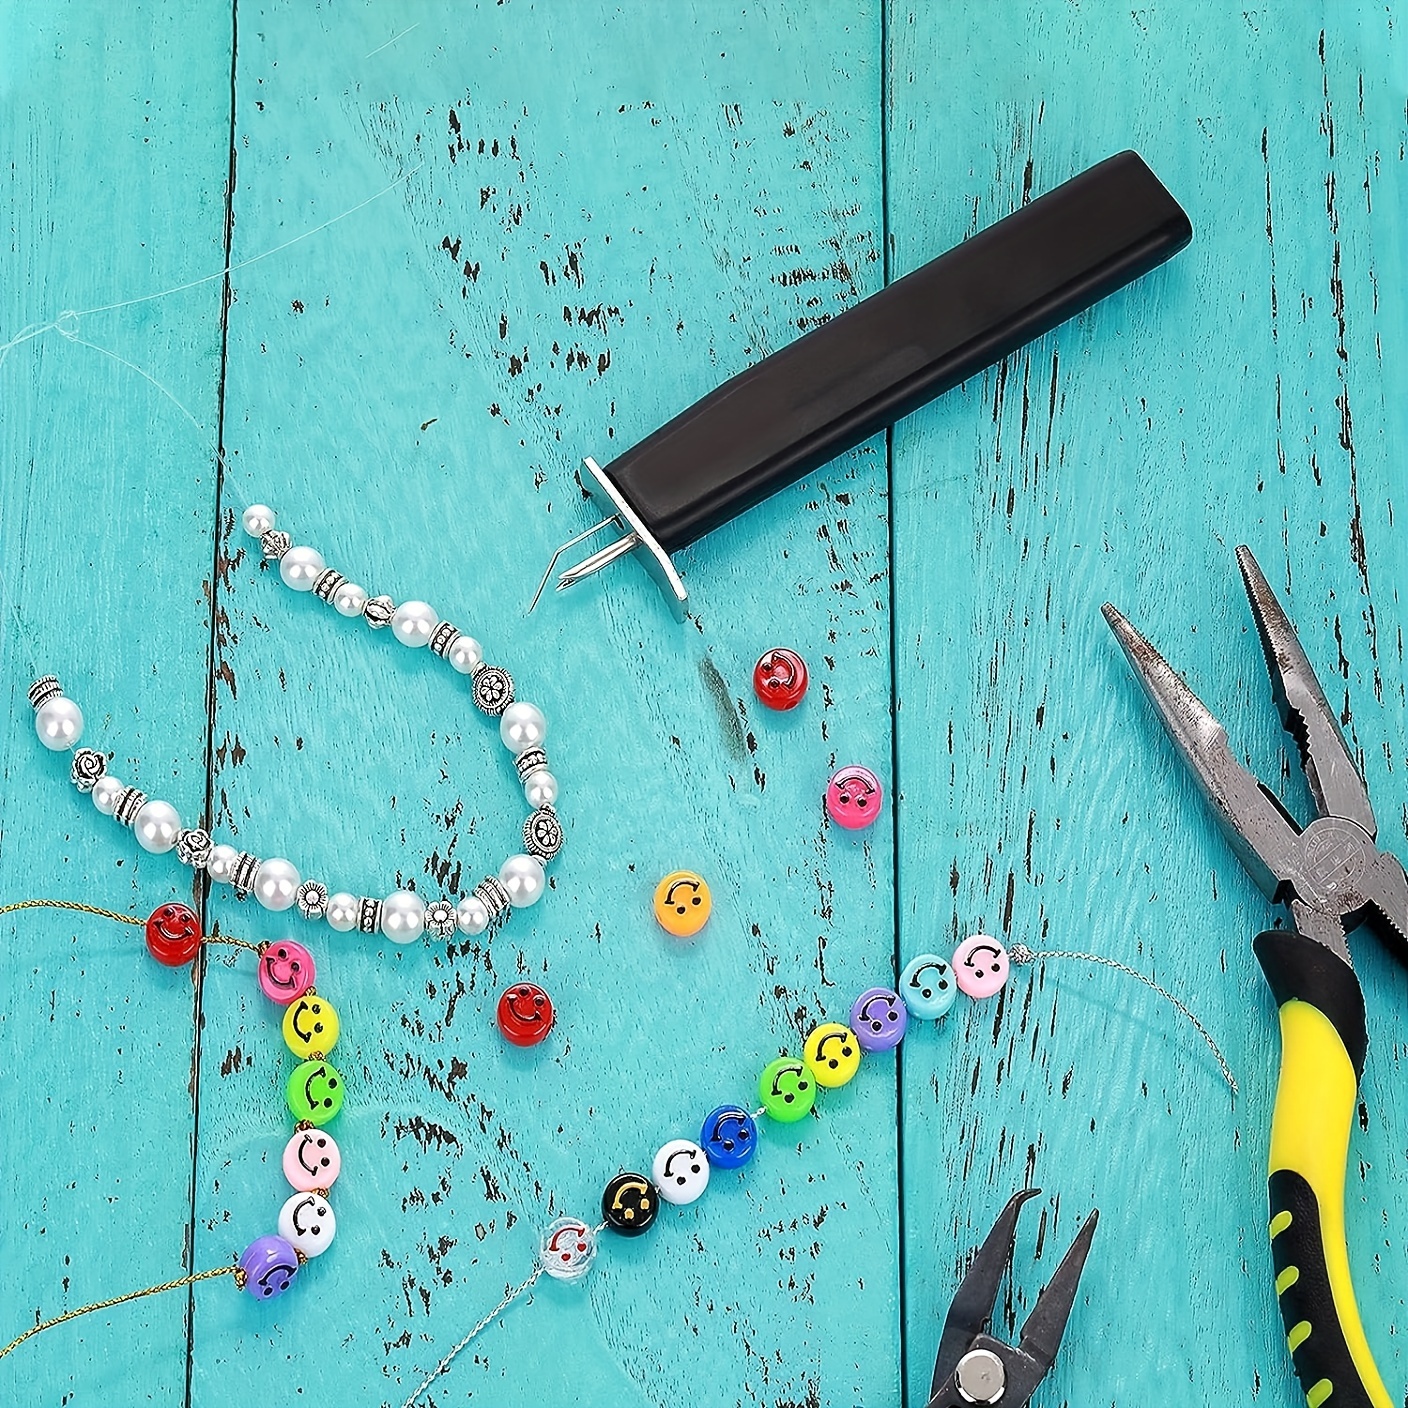 DIY Bead Threader Tool for Jewelry Making: TIP TUESDAY